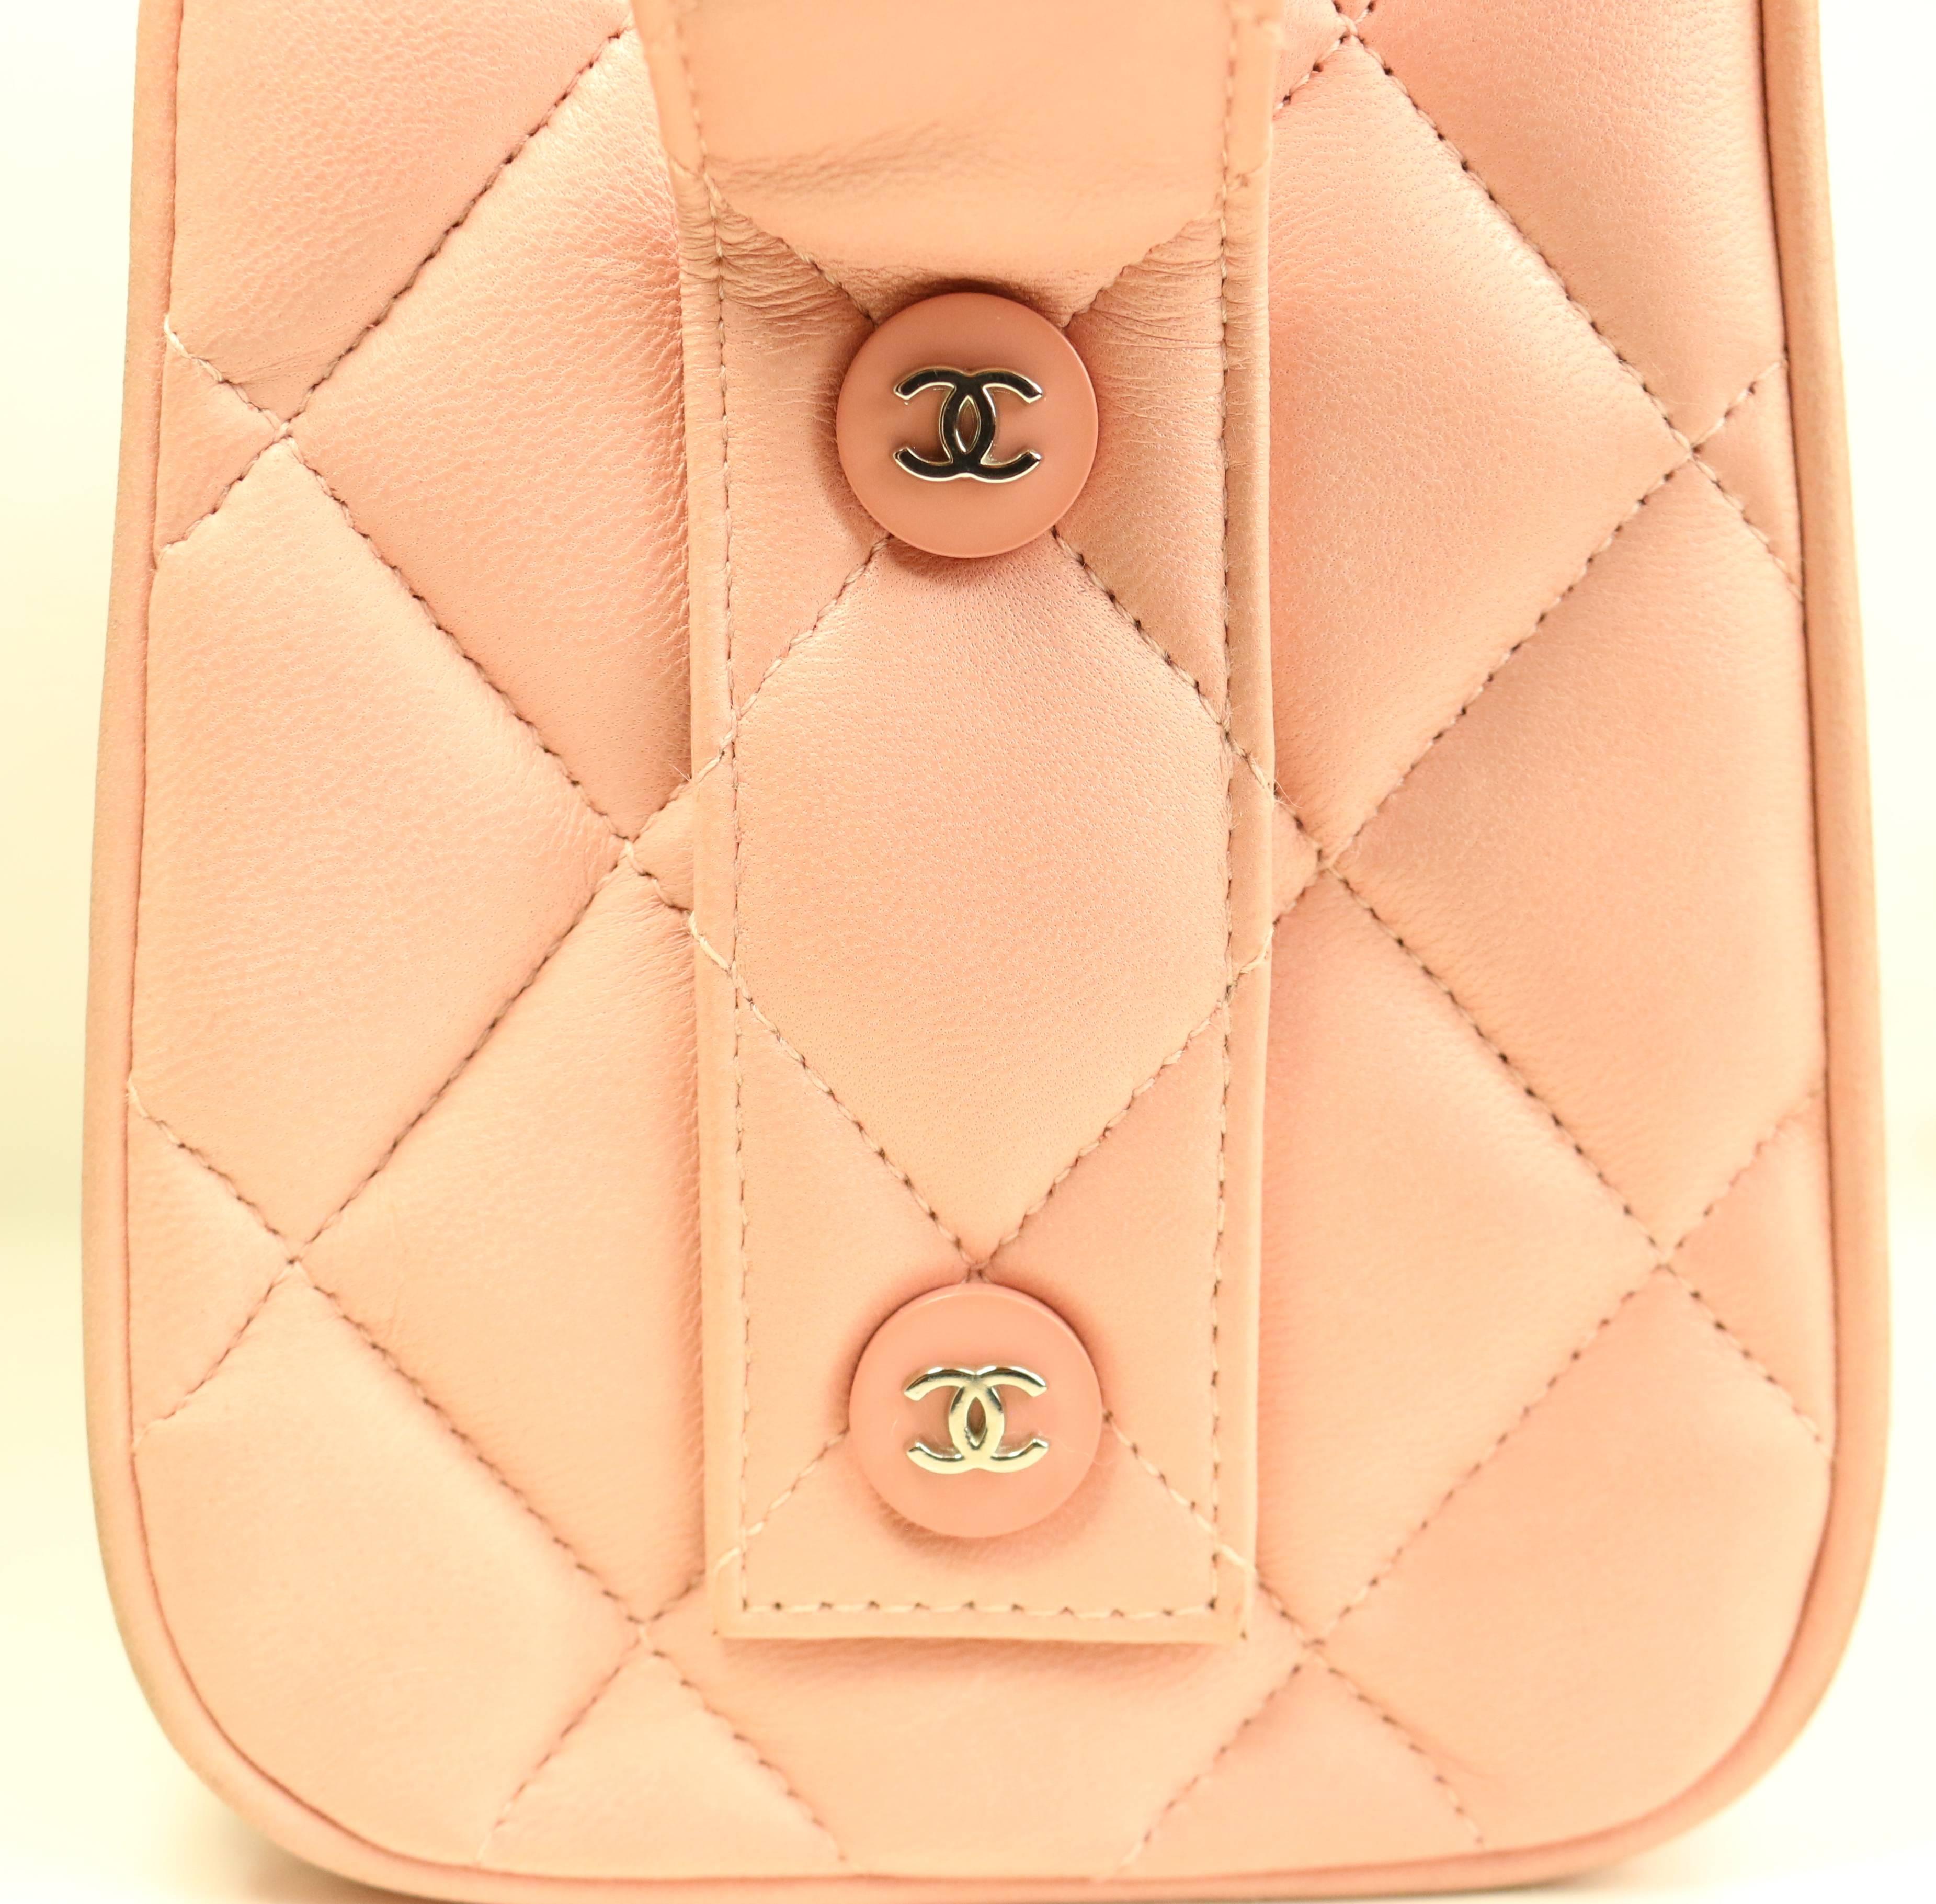 - Vintage 90s Chanel pink quilted lambskin leather box handbag

- Double frame top opening with a hook closure. 

- Silver 